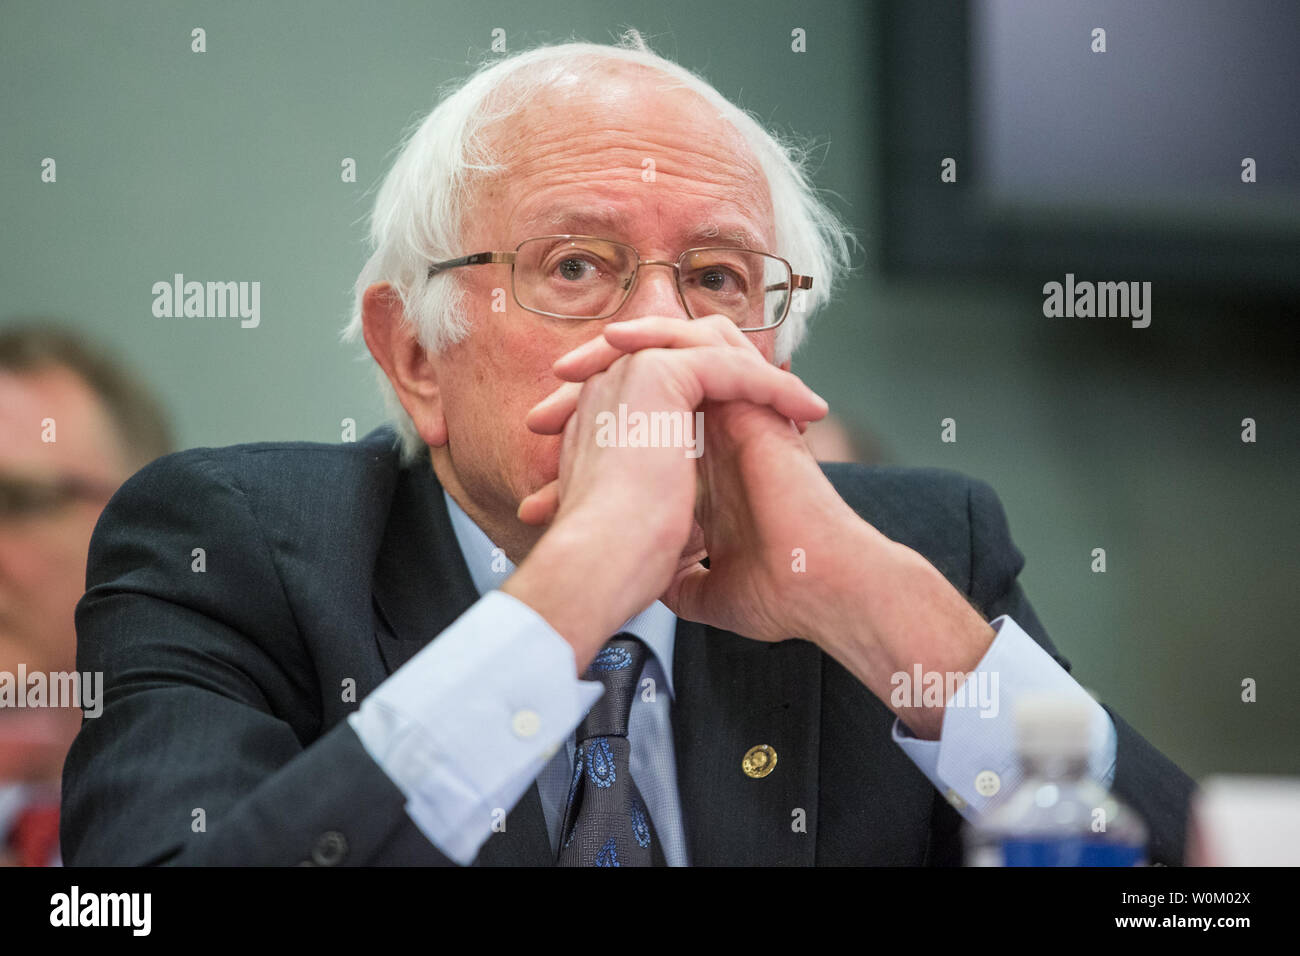 Sen. Bernie Sanders (I-VT) is present at a meeting of House and Senate conferees after GOP leaders announced that they had come to an agreement on a tax overhaul bill on Capitol Hill in Washington, DC on December 13, 2017. Democrats have asked that a vote on the bill be delayed until AlabamaÕs Senator-elect Doug Jones can be seated. Photo by Erin Schaff/UPI Stock Photo